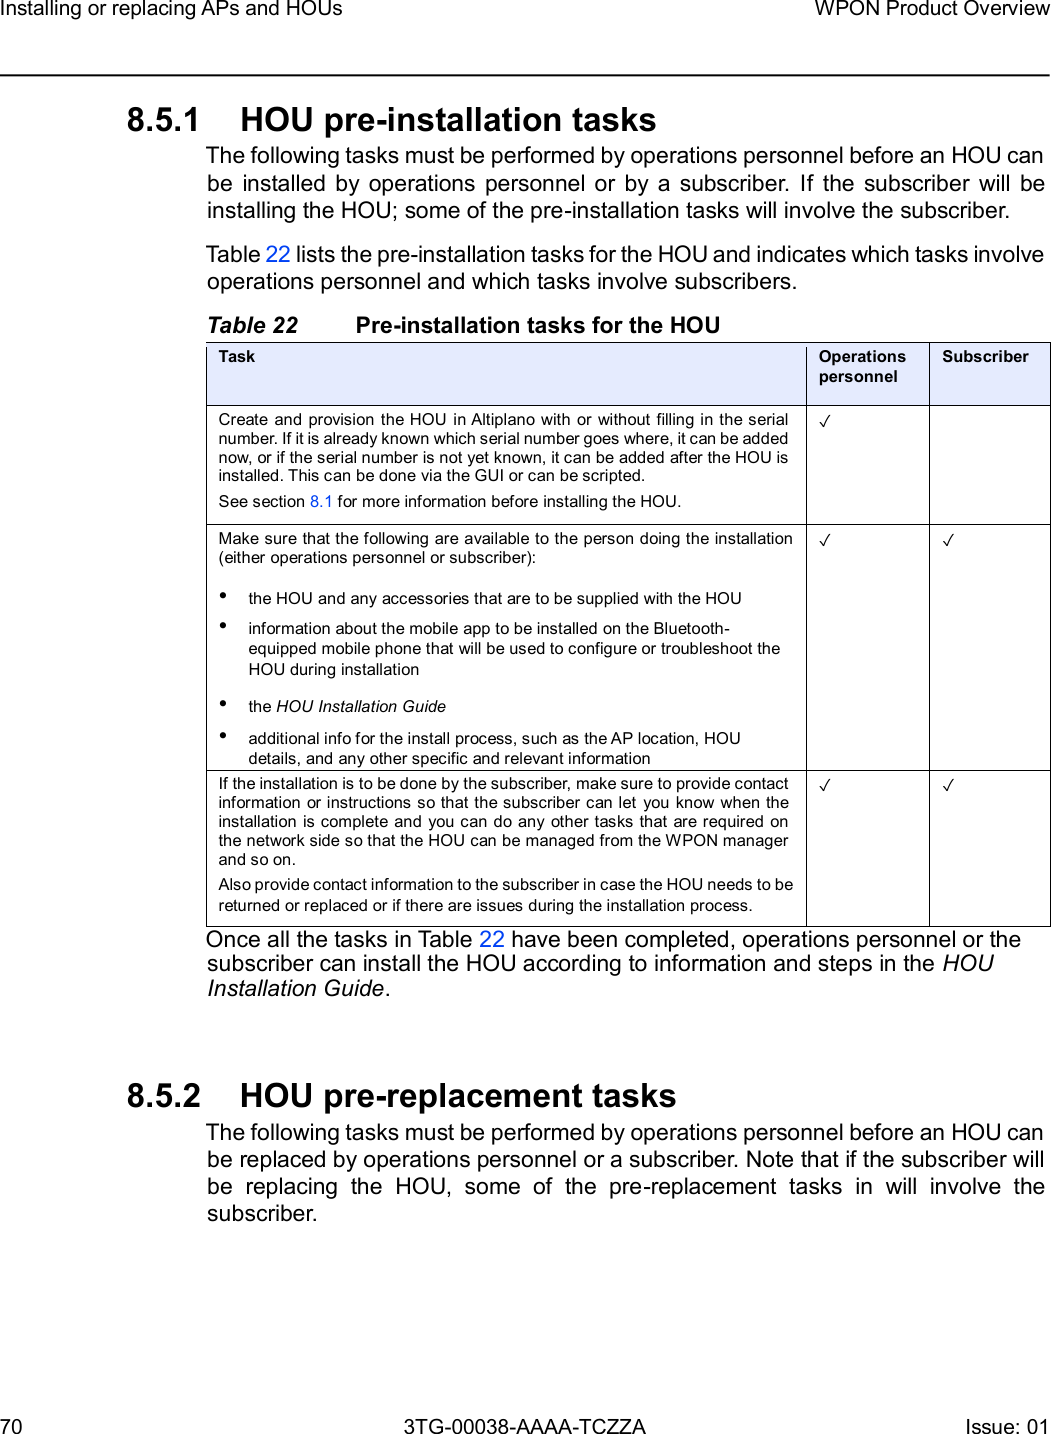 Page 70 of Nokia Bell 7577WPONAPAC WPON User Manual WPON Product Overview